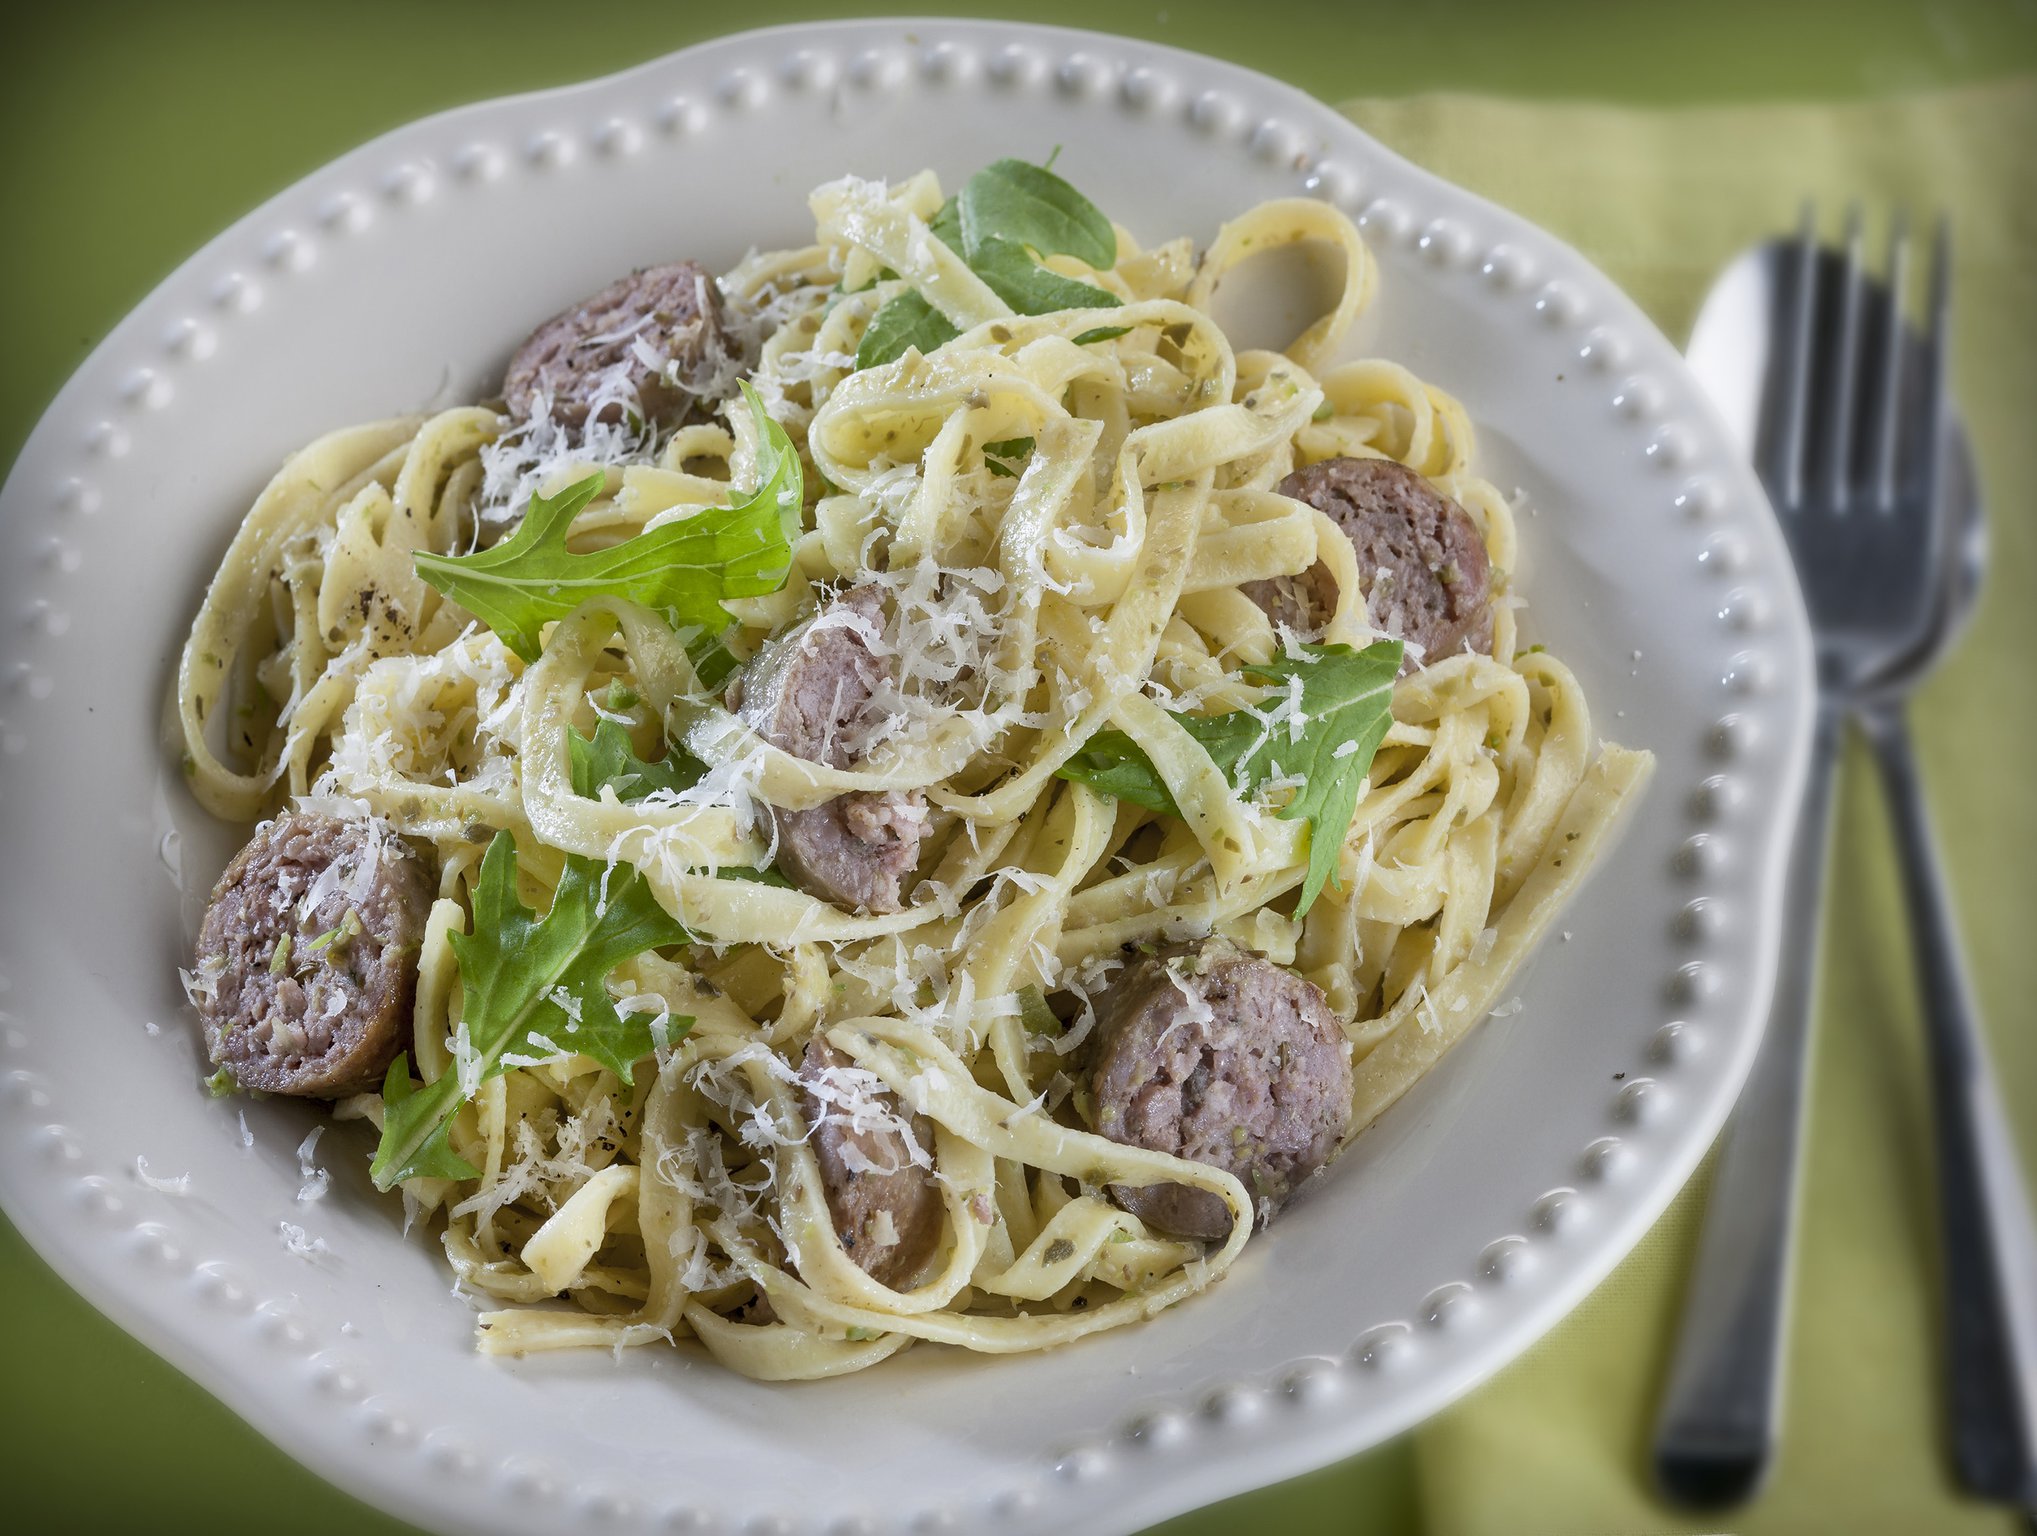 Olive tapenade pasta matches wines with good acidity, spice notes